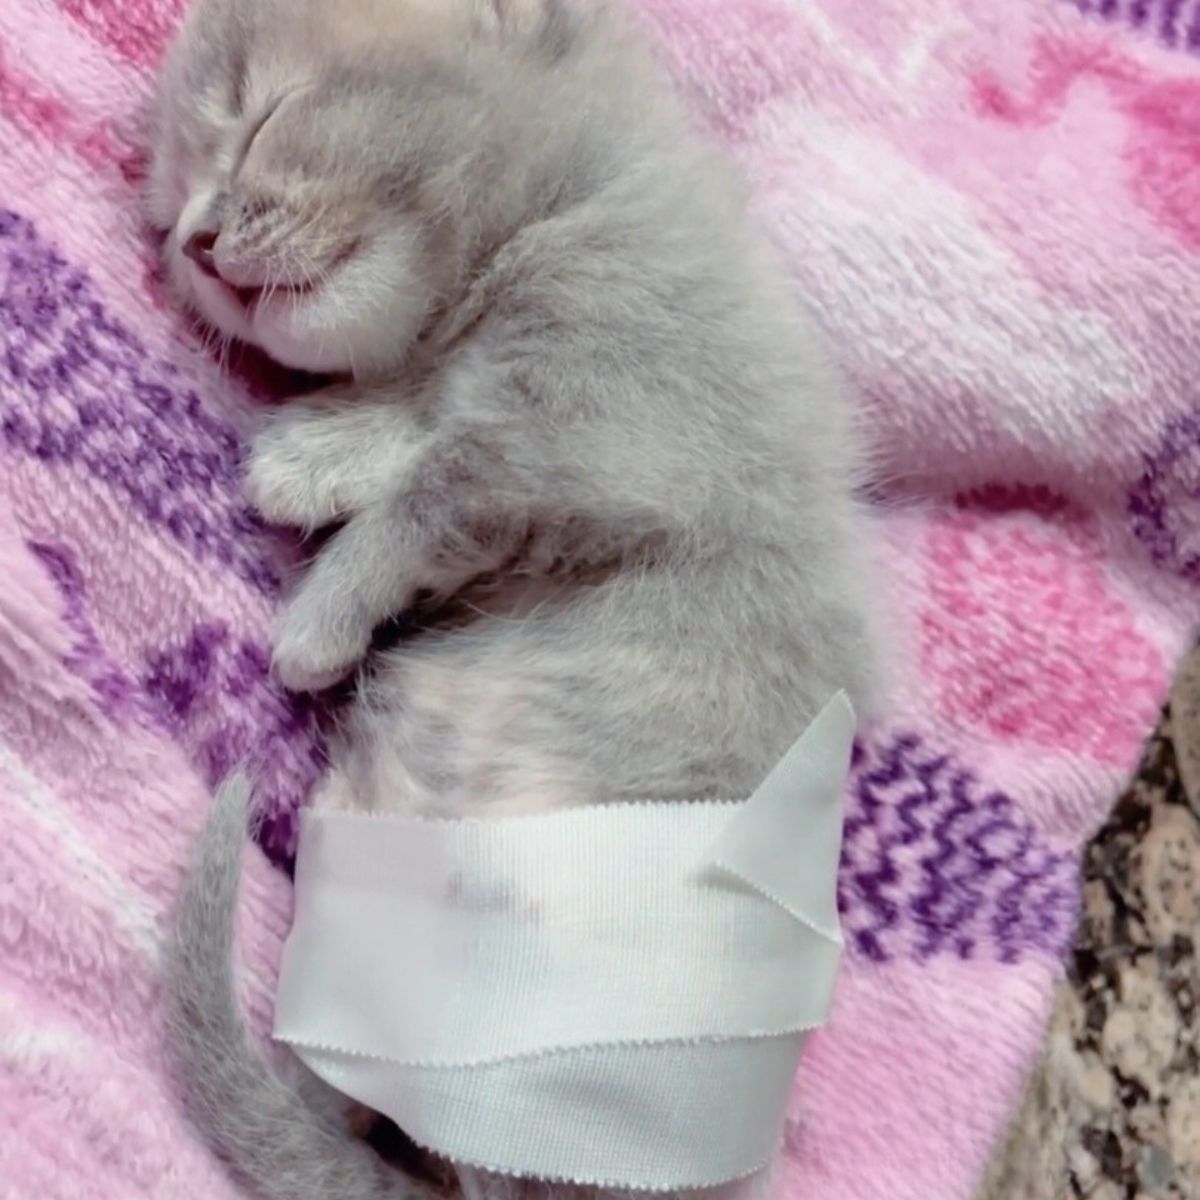 tiny kitten with taped back legs